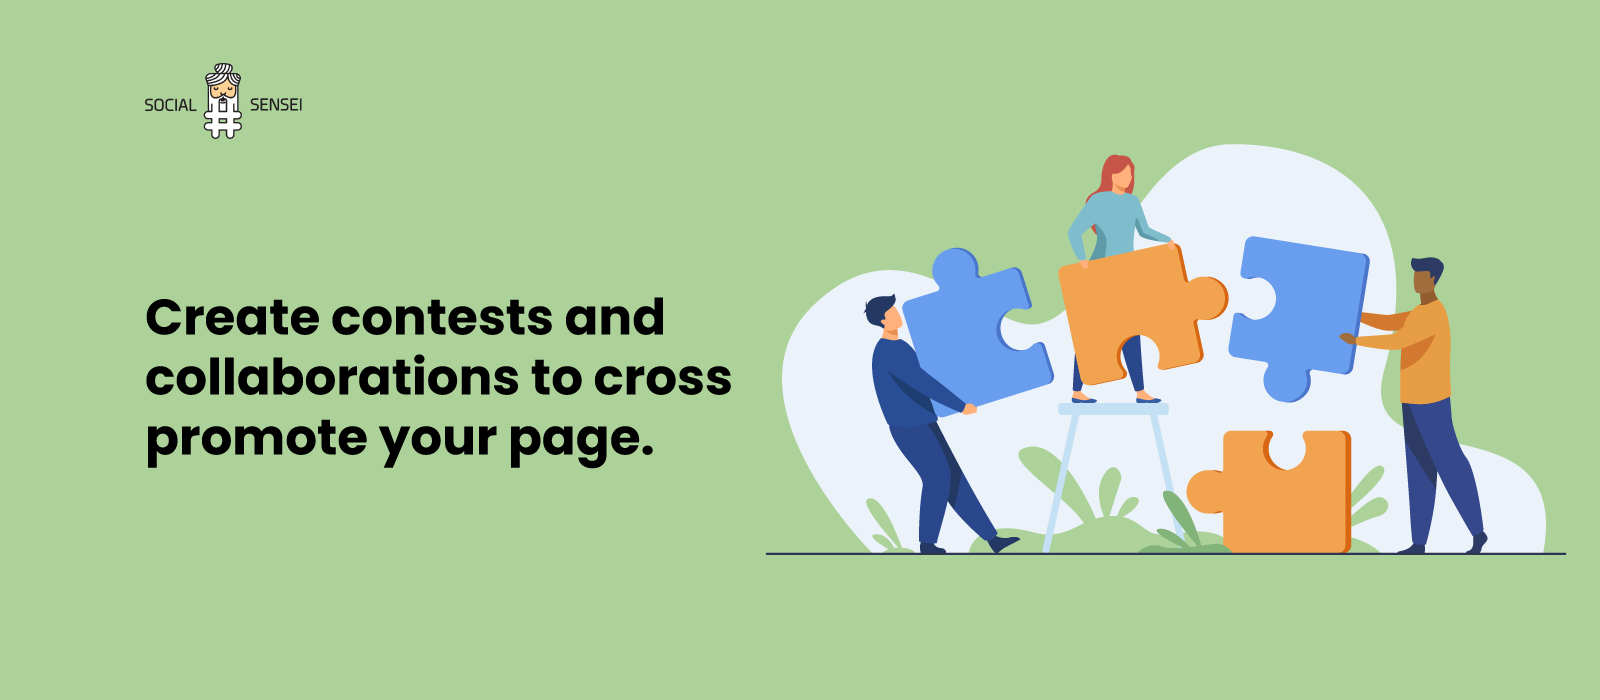 Create contests and collaborations to cross promote your page